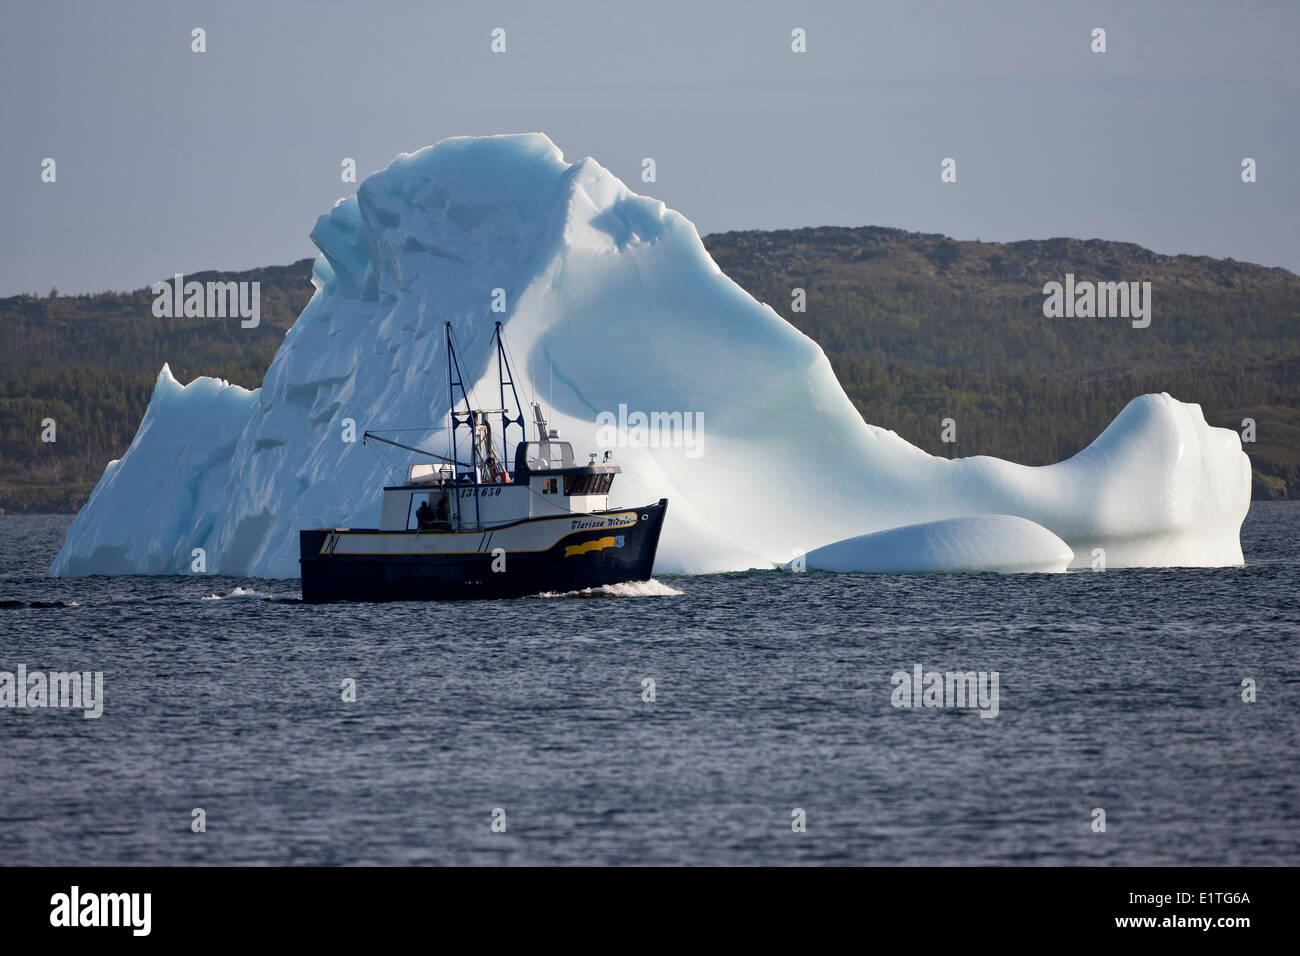 A fishing boat passes by a medium-sized iceberg near the shore the town St. Lunaire-Griquet on the island Newfoundland Stock Photo